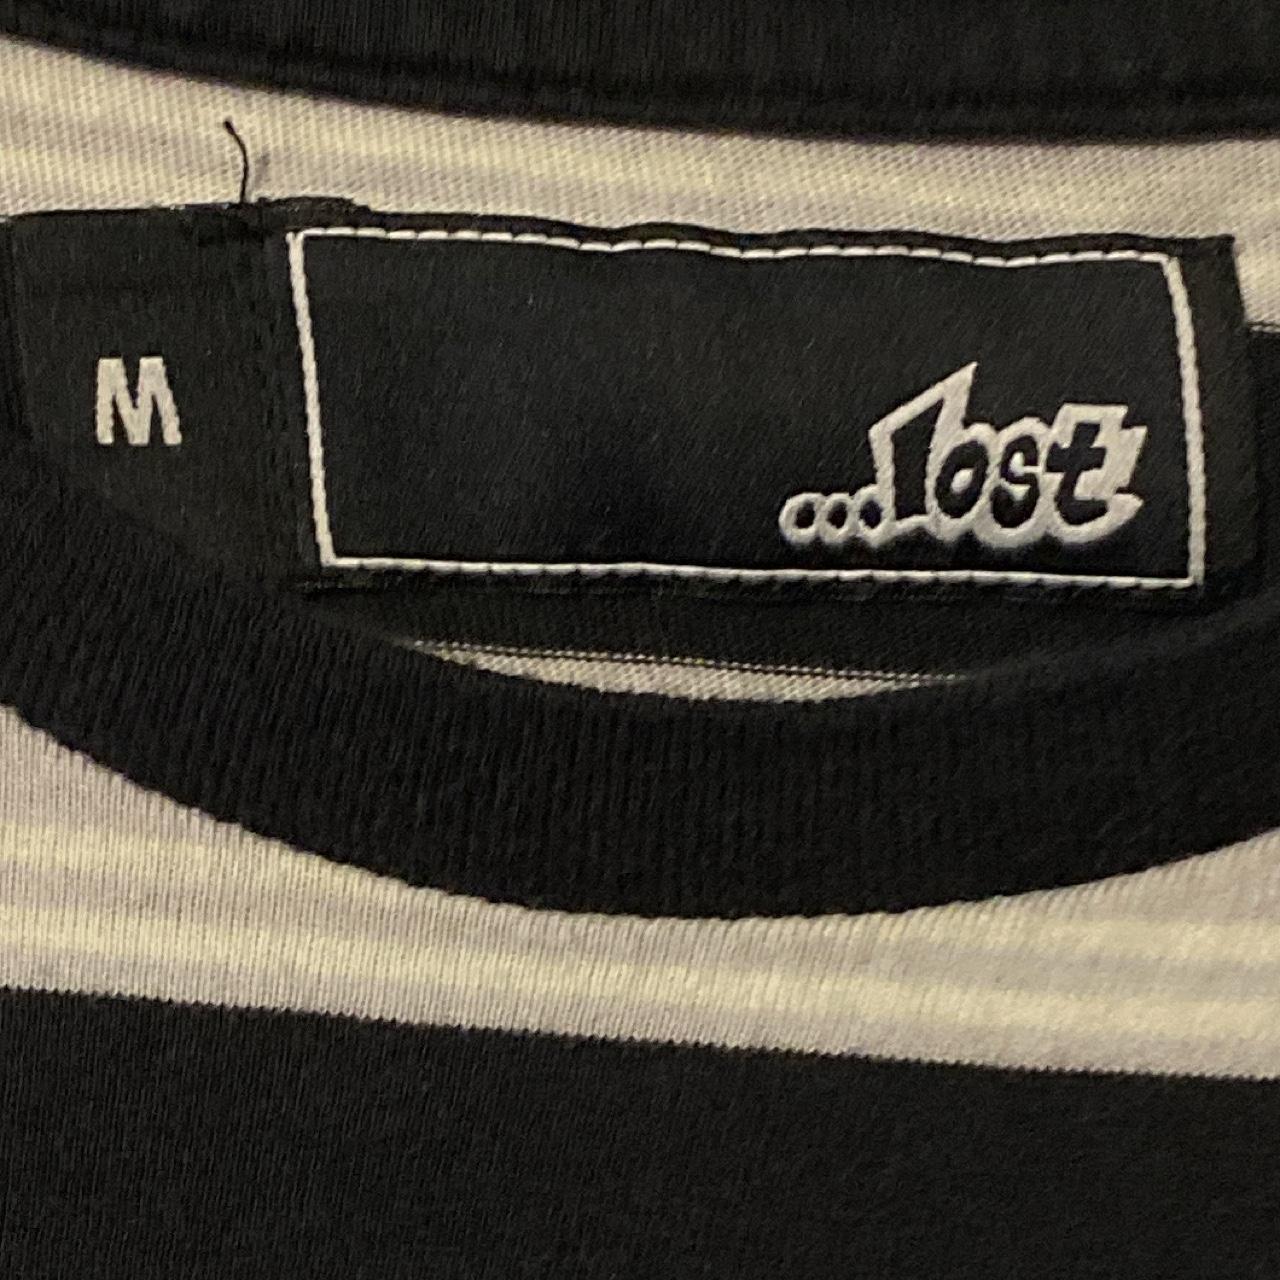 Lost Ink Men's Black and White T-shirt (2)